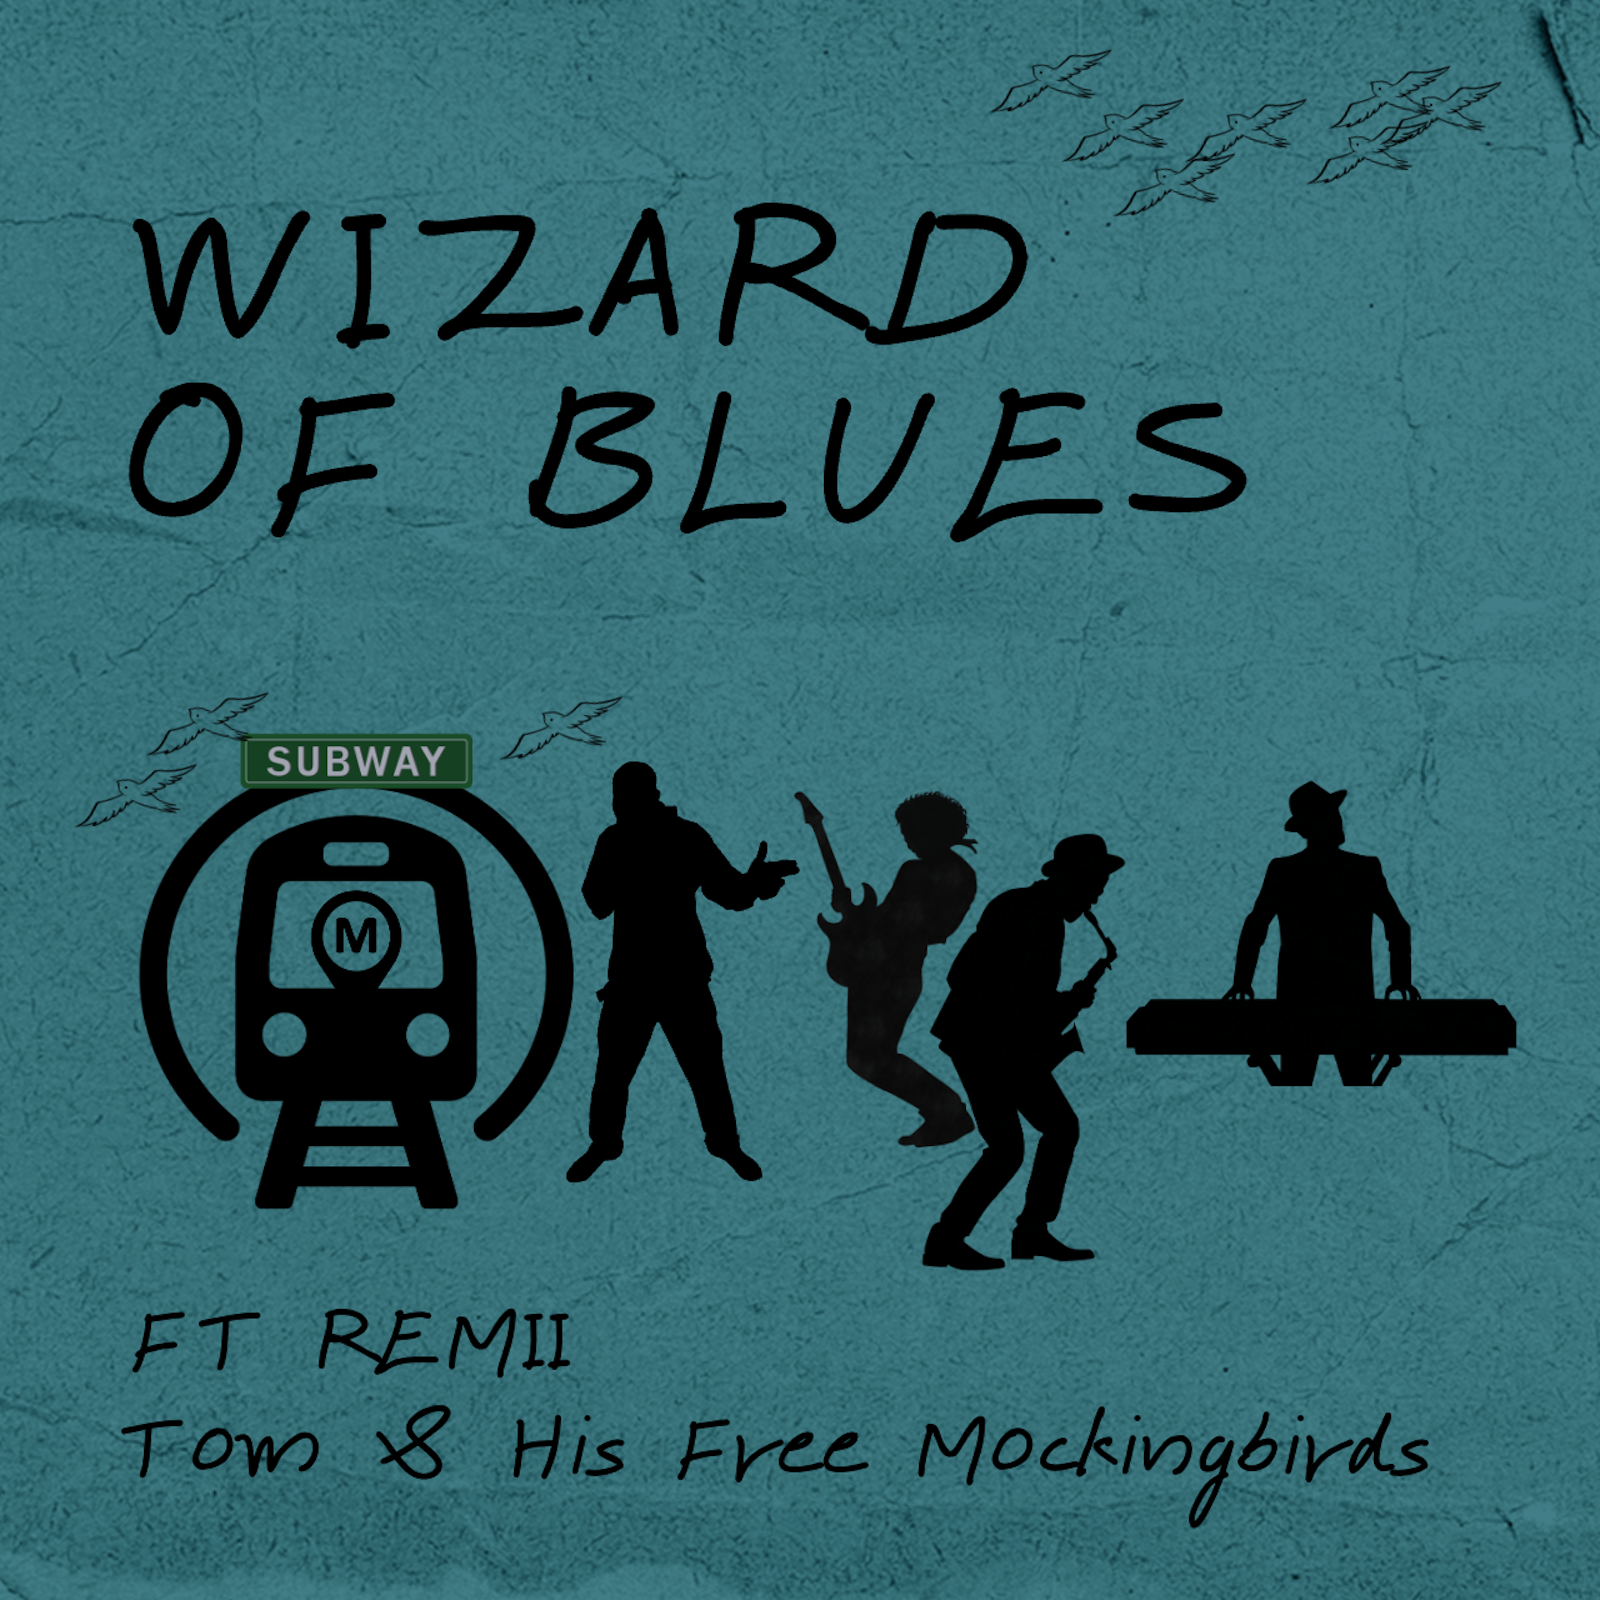 Tom & His Free Mockingbirds: Blues Mastery Unleashed with ‘Wizards of Blues’ – Conquering The Bafana FM Playlist